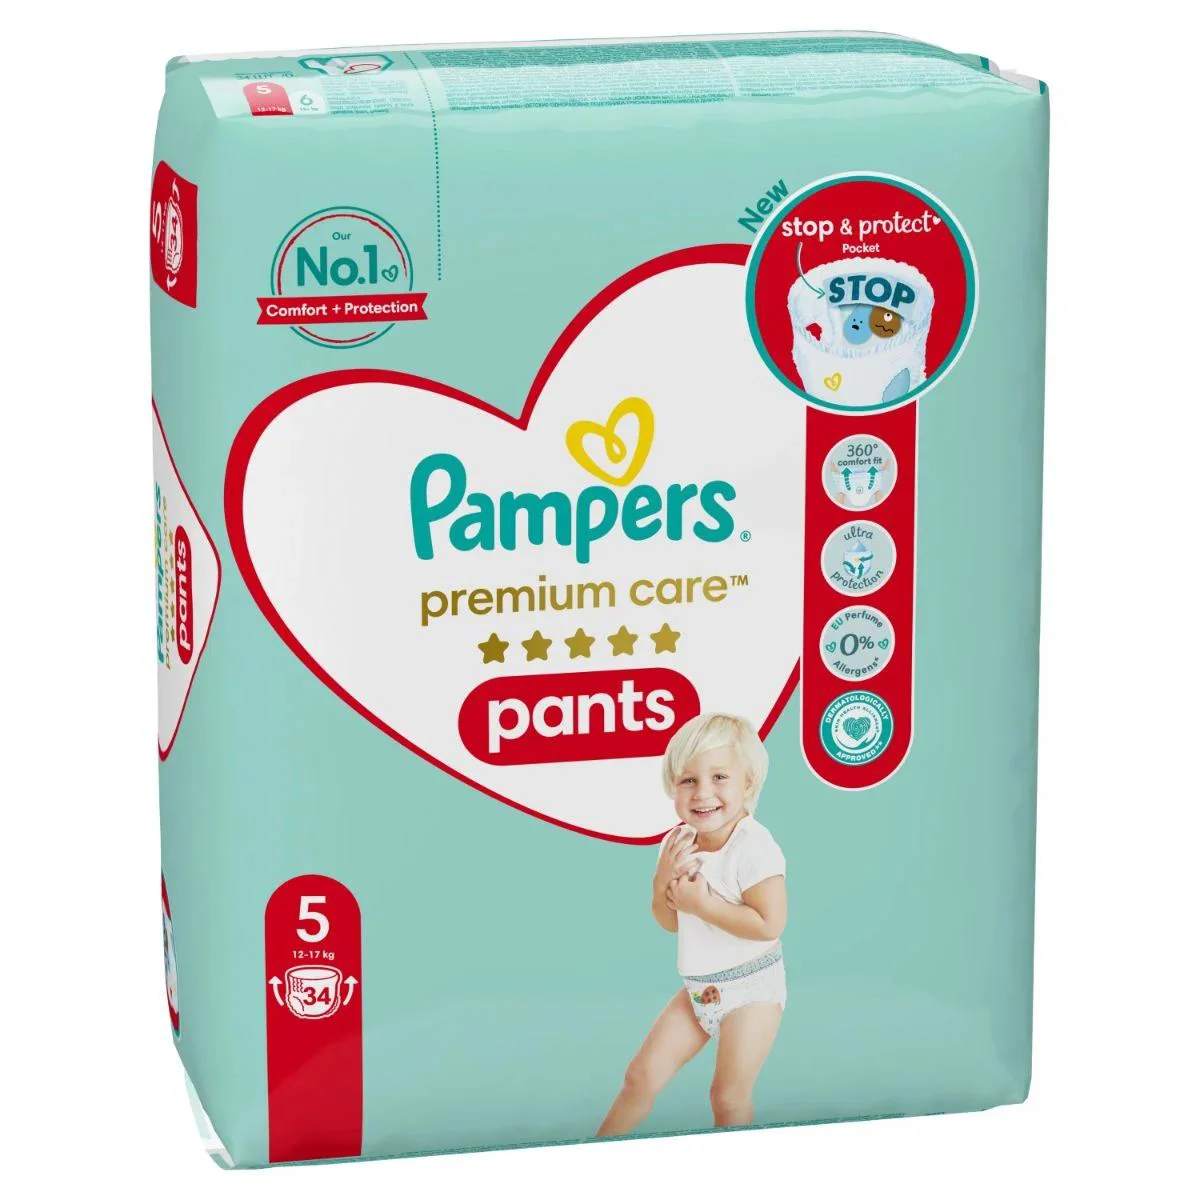 Chilotei Pampers Premium Care Pants 5 (12-17 kg), 34 buc.